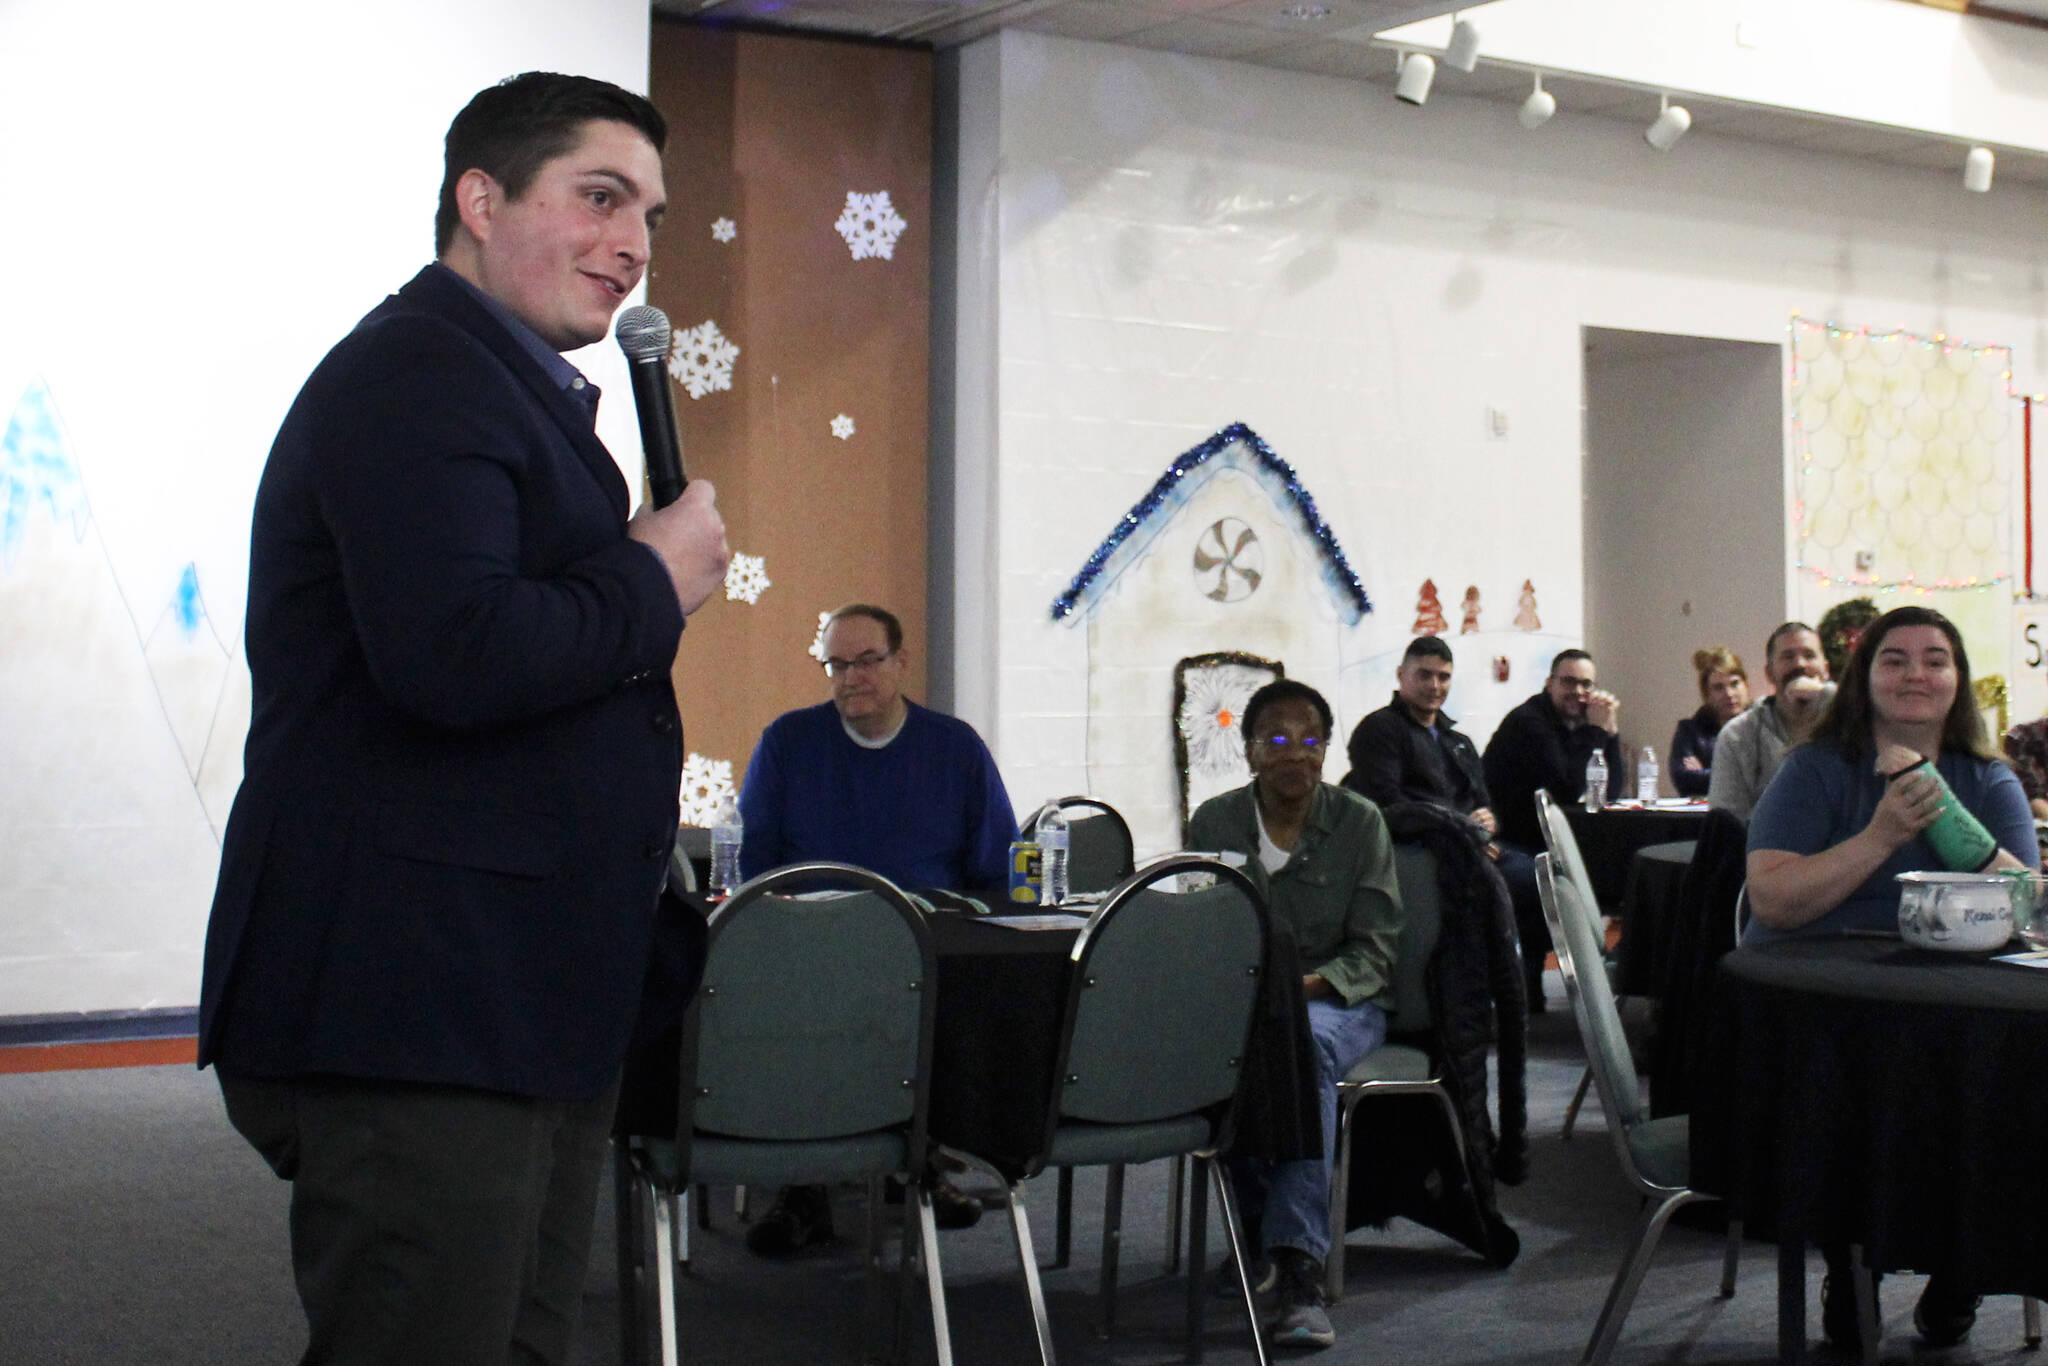 Rep. Justin Ruffridge, R-Soldotna, answers questions from constituents during a legislative update at the Kenai Chamber of Commerce and Visitor Center on Wednesday, Dec. 6, 2023, in Kenai, Alaska. (Ashlyn O’Hara/Peninsula Clarion)